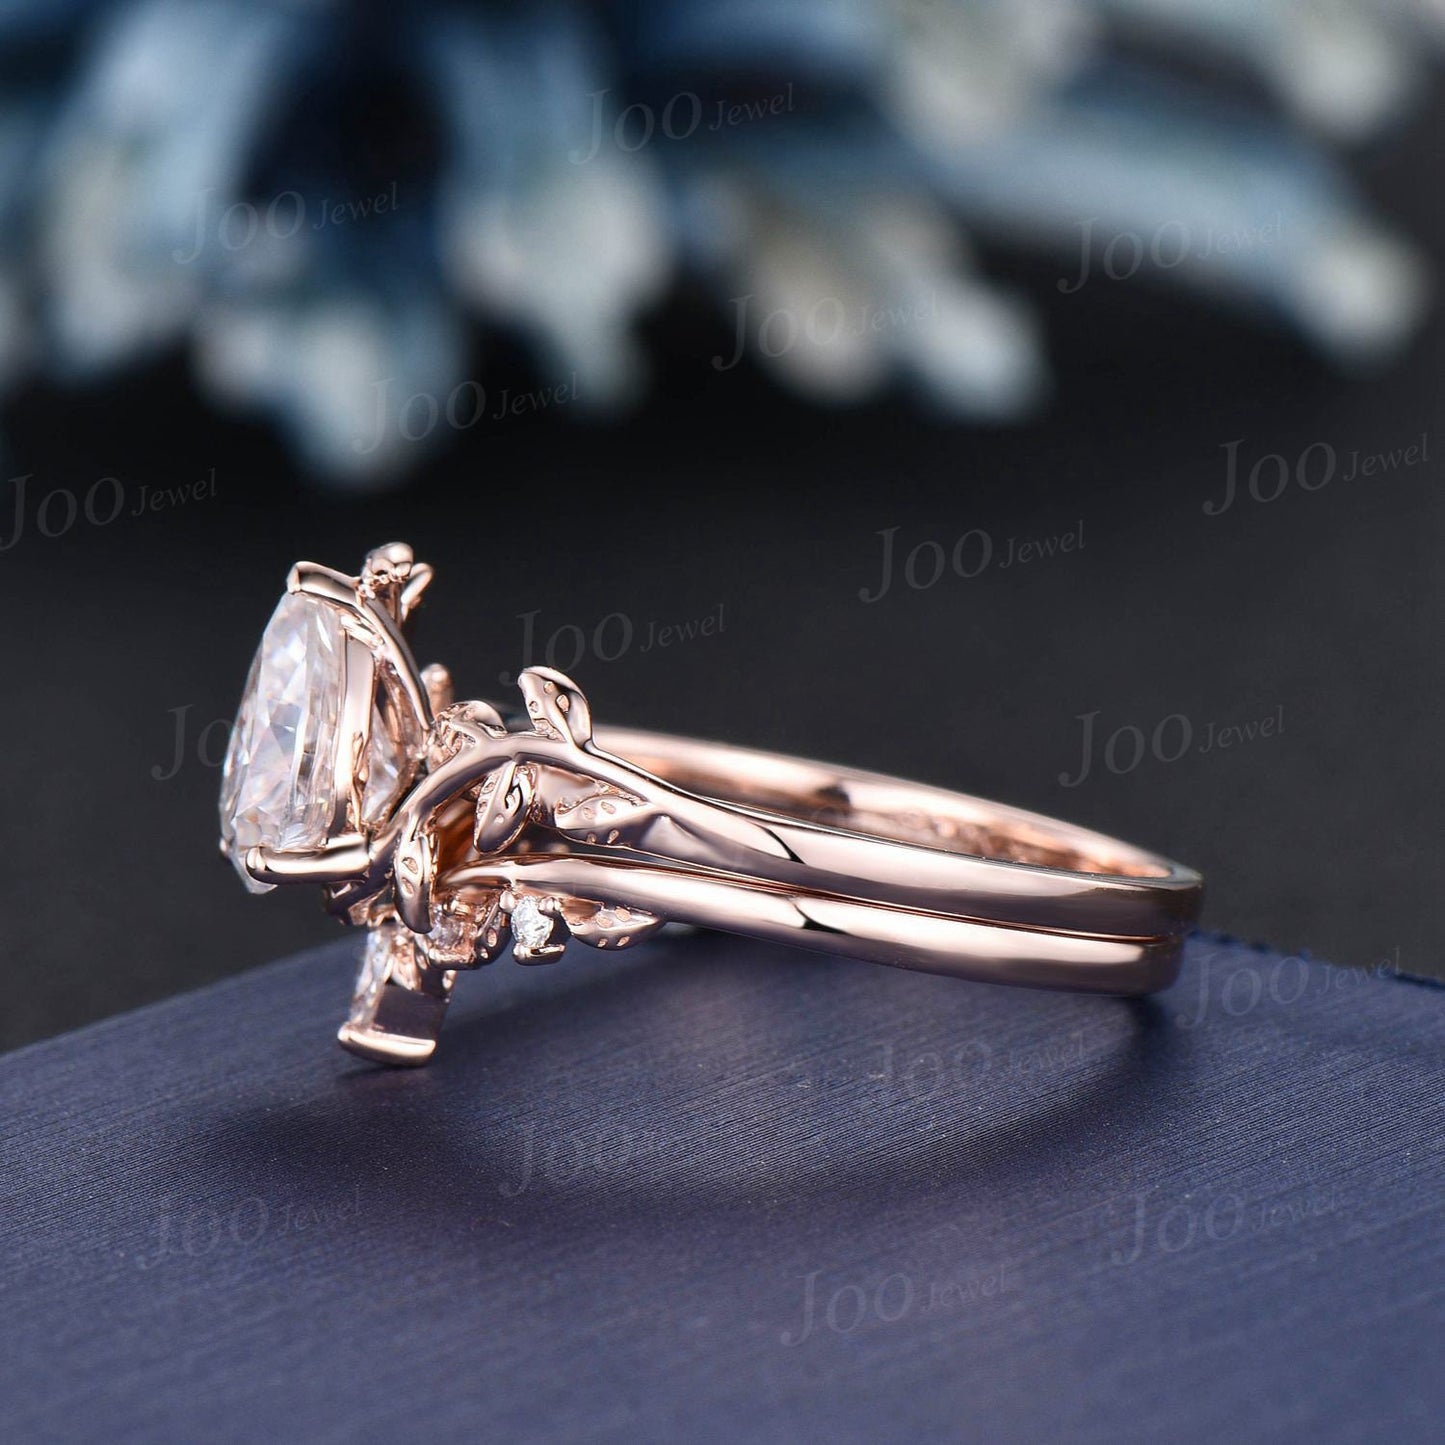 1.25ct Pear Moissanite Ring Set Nature Inspired Diamond Engagement Ring Rose Gold Leaf Vine Branch Solitaire Ring Wedding Anniversary Gifts